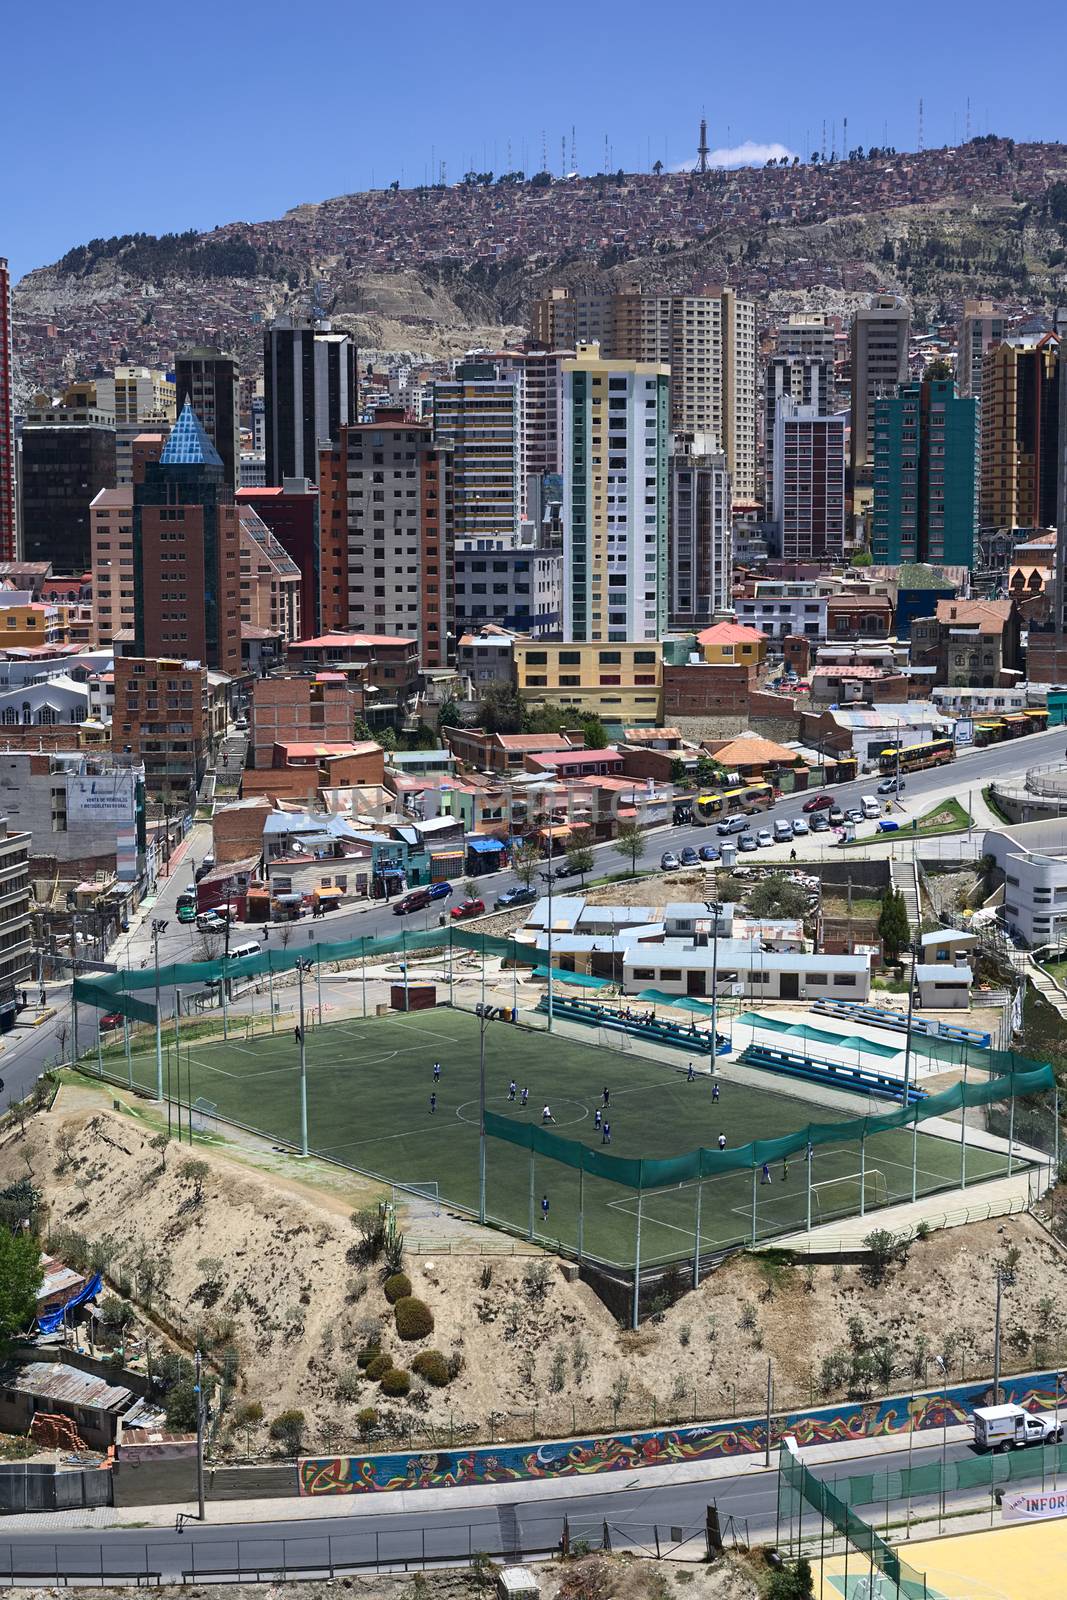 LA PAZ, BOLIVIA - OCTOBER 14, 2014: Unidentified people playing football on the pitch Cancha Zapata along Zapata avenue close to the Parque Urbano Central (Central Urban Park) on October 14, 2014 in La Paz, Bolivia